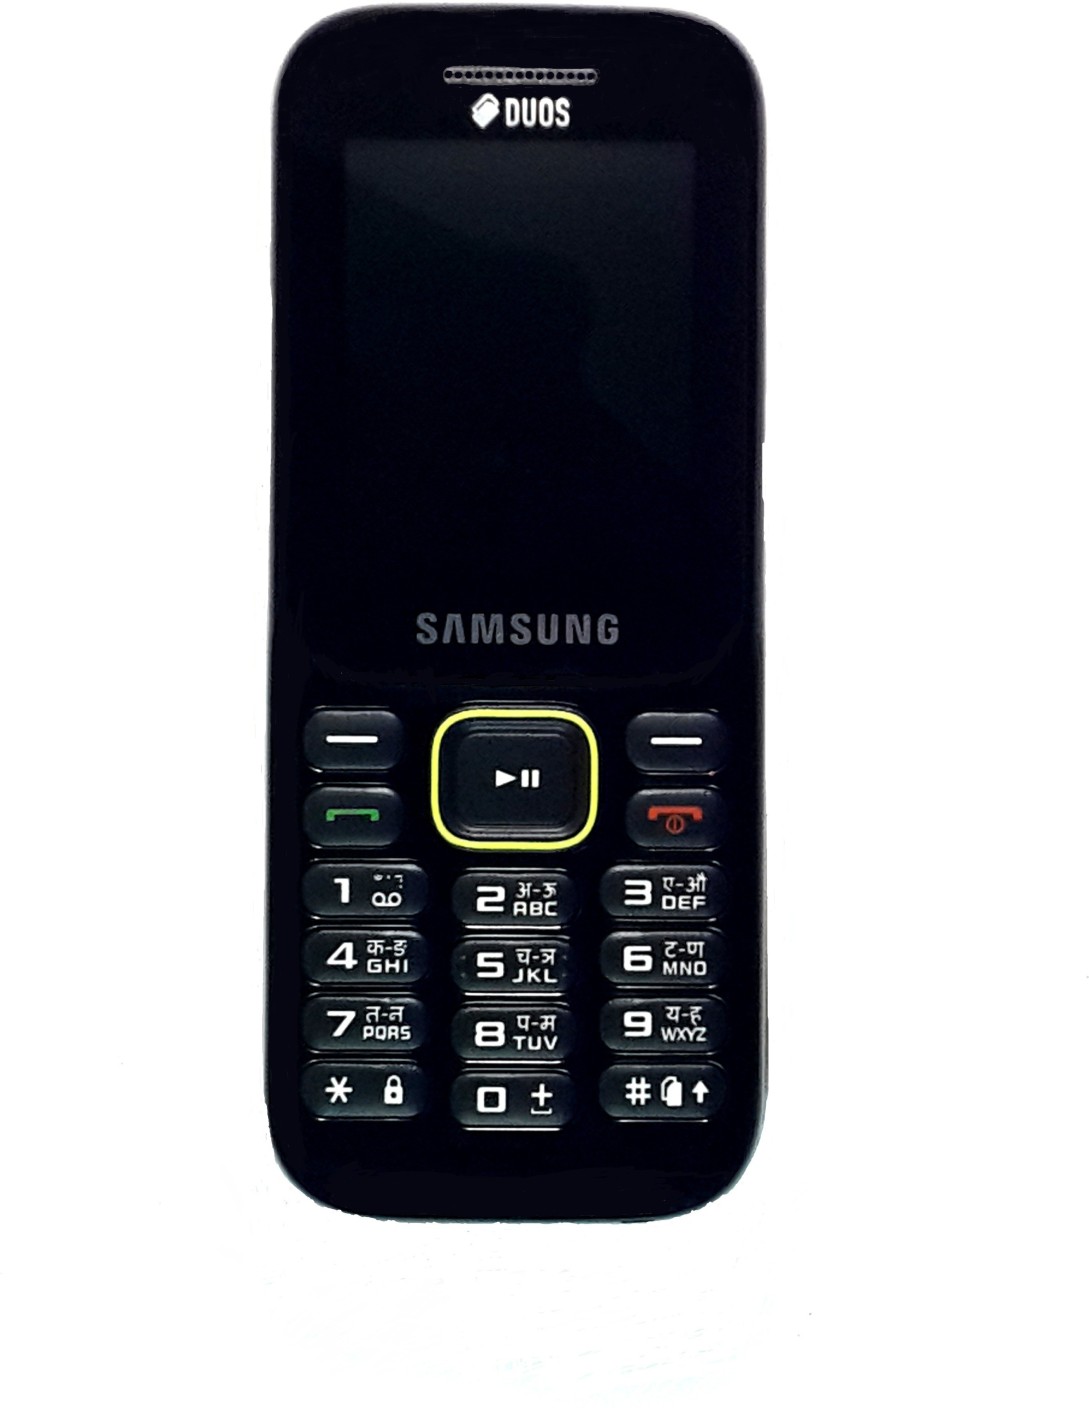 Samsung Guru Music 2 SMB310E Online at Best Price with Great Offers Only On Flipkart.com